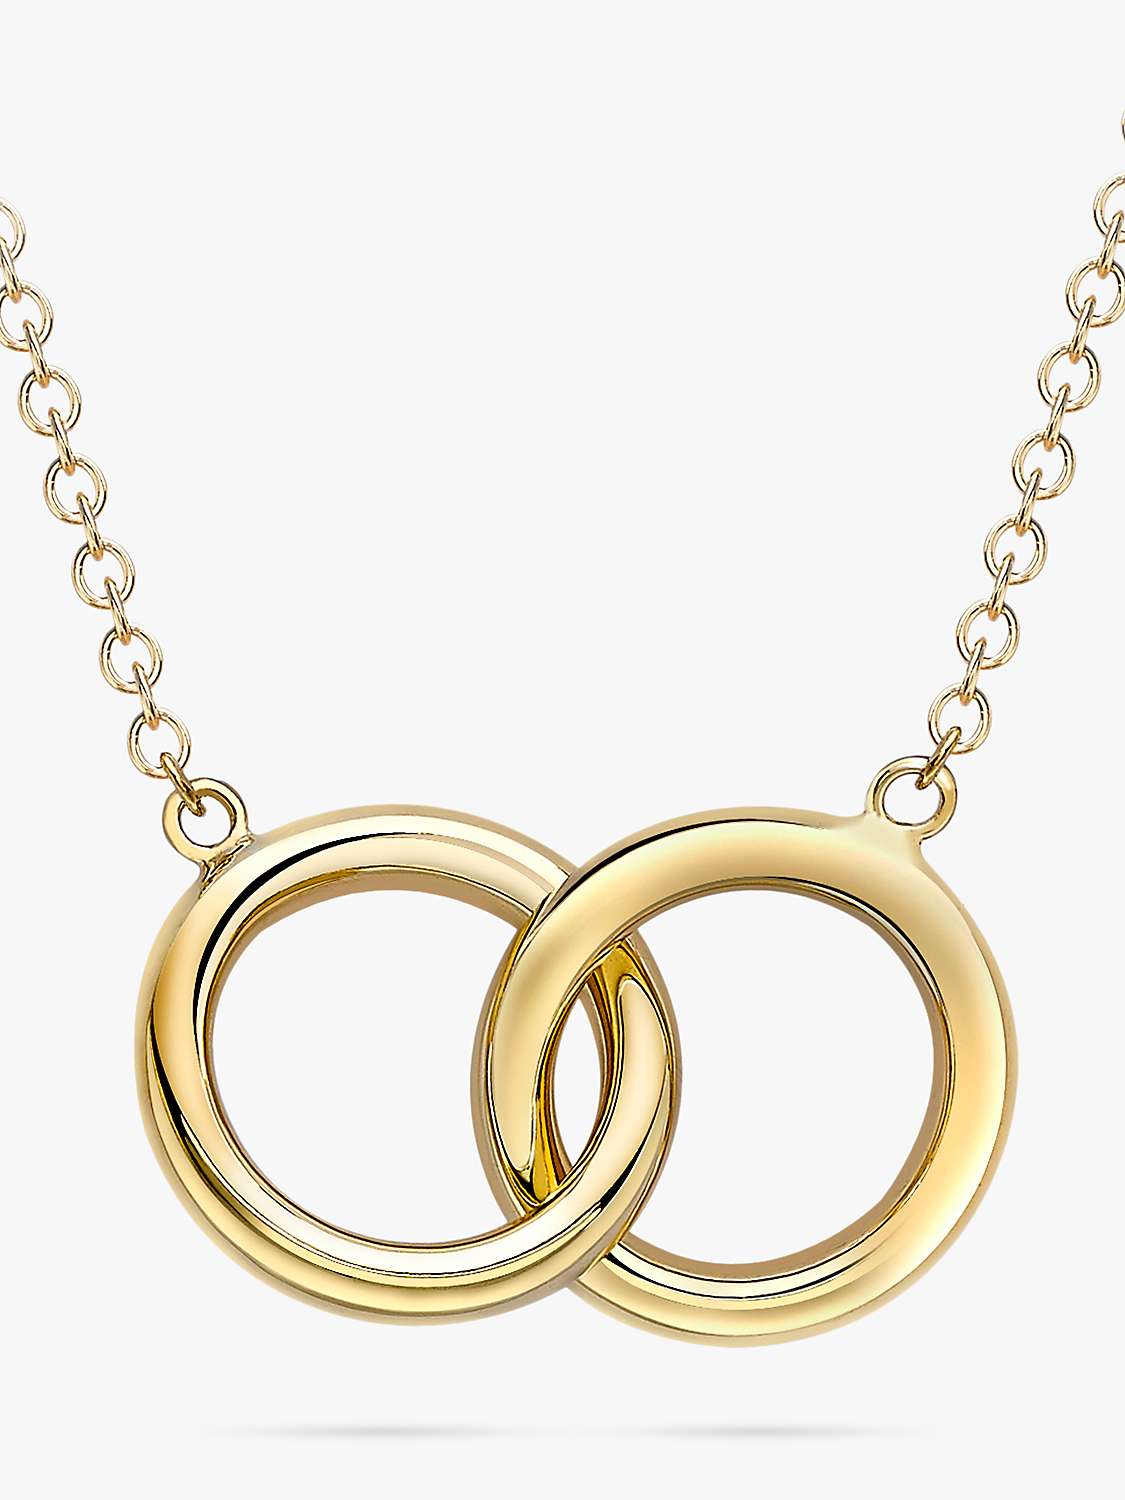 Buy IBB 9ct Gold Linked Ring Pendant Necklace, Gold Online at johnlewis.com